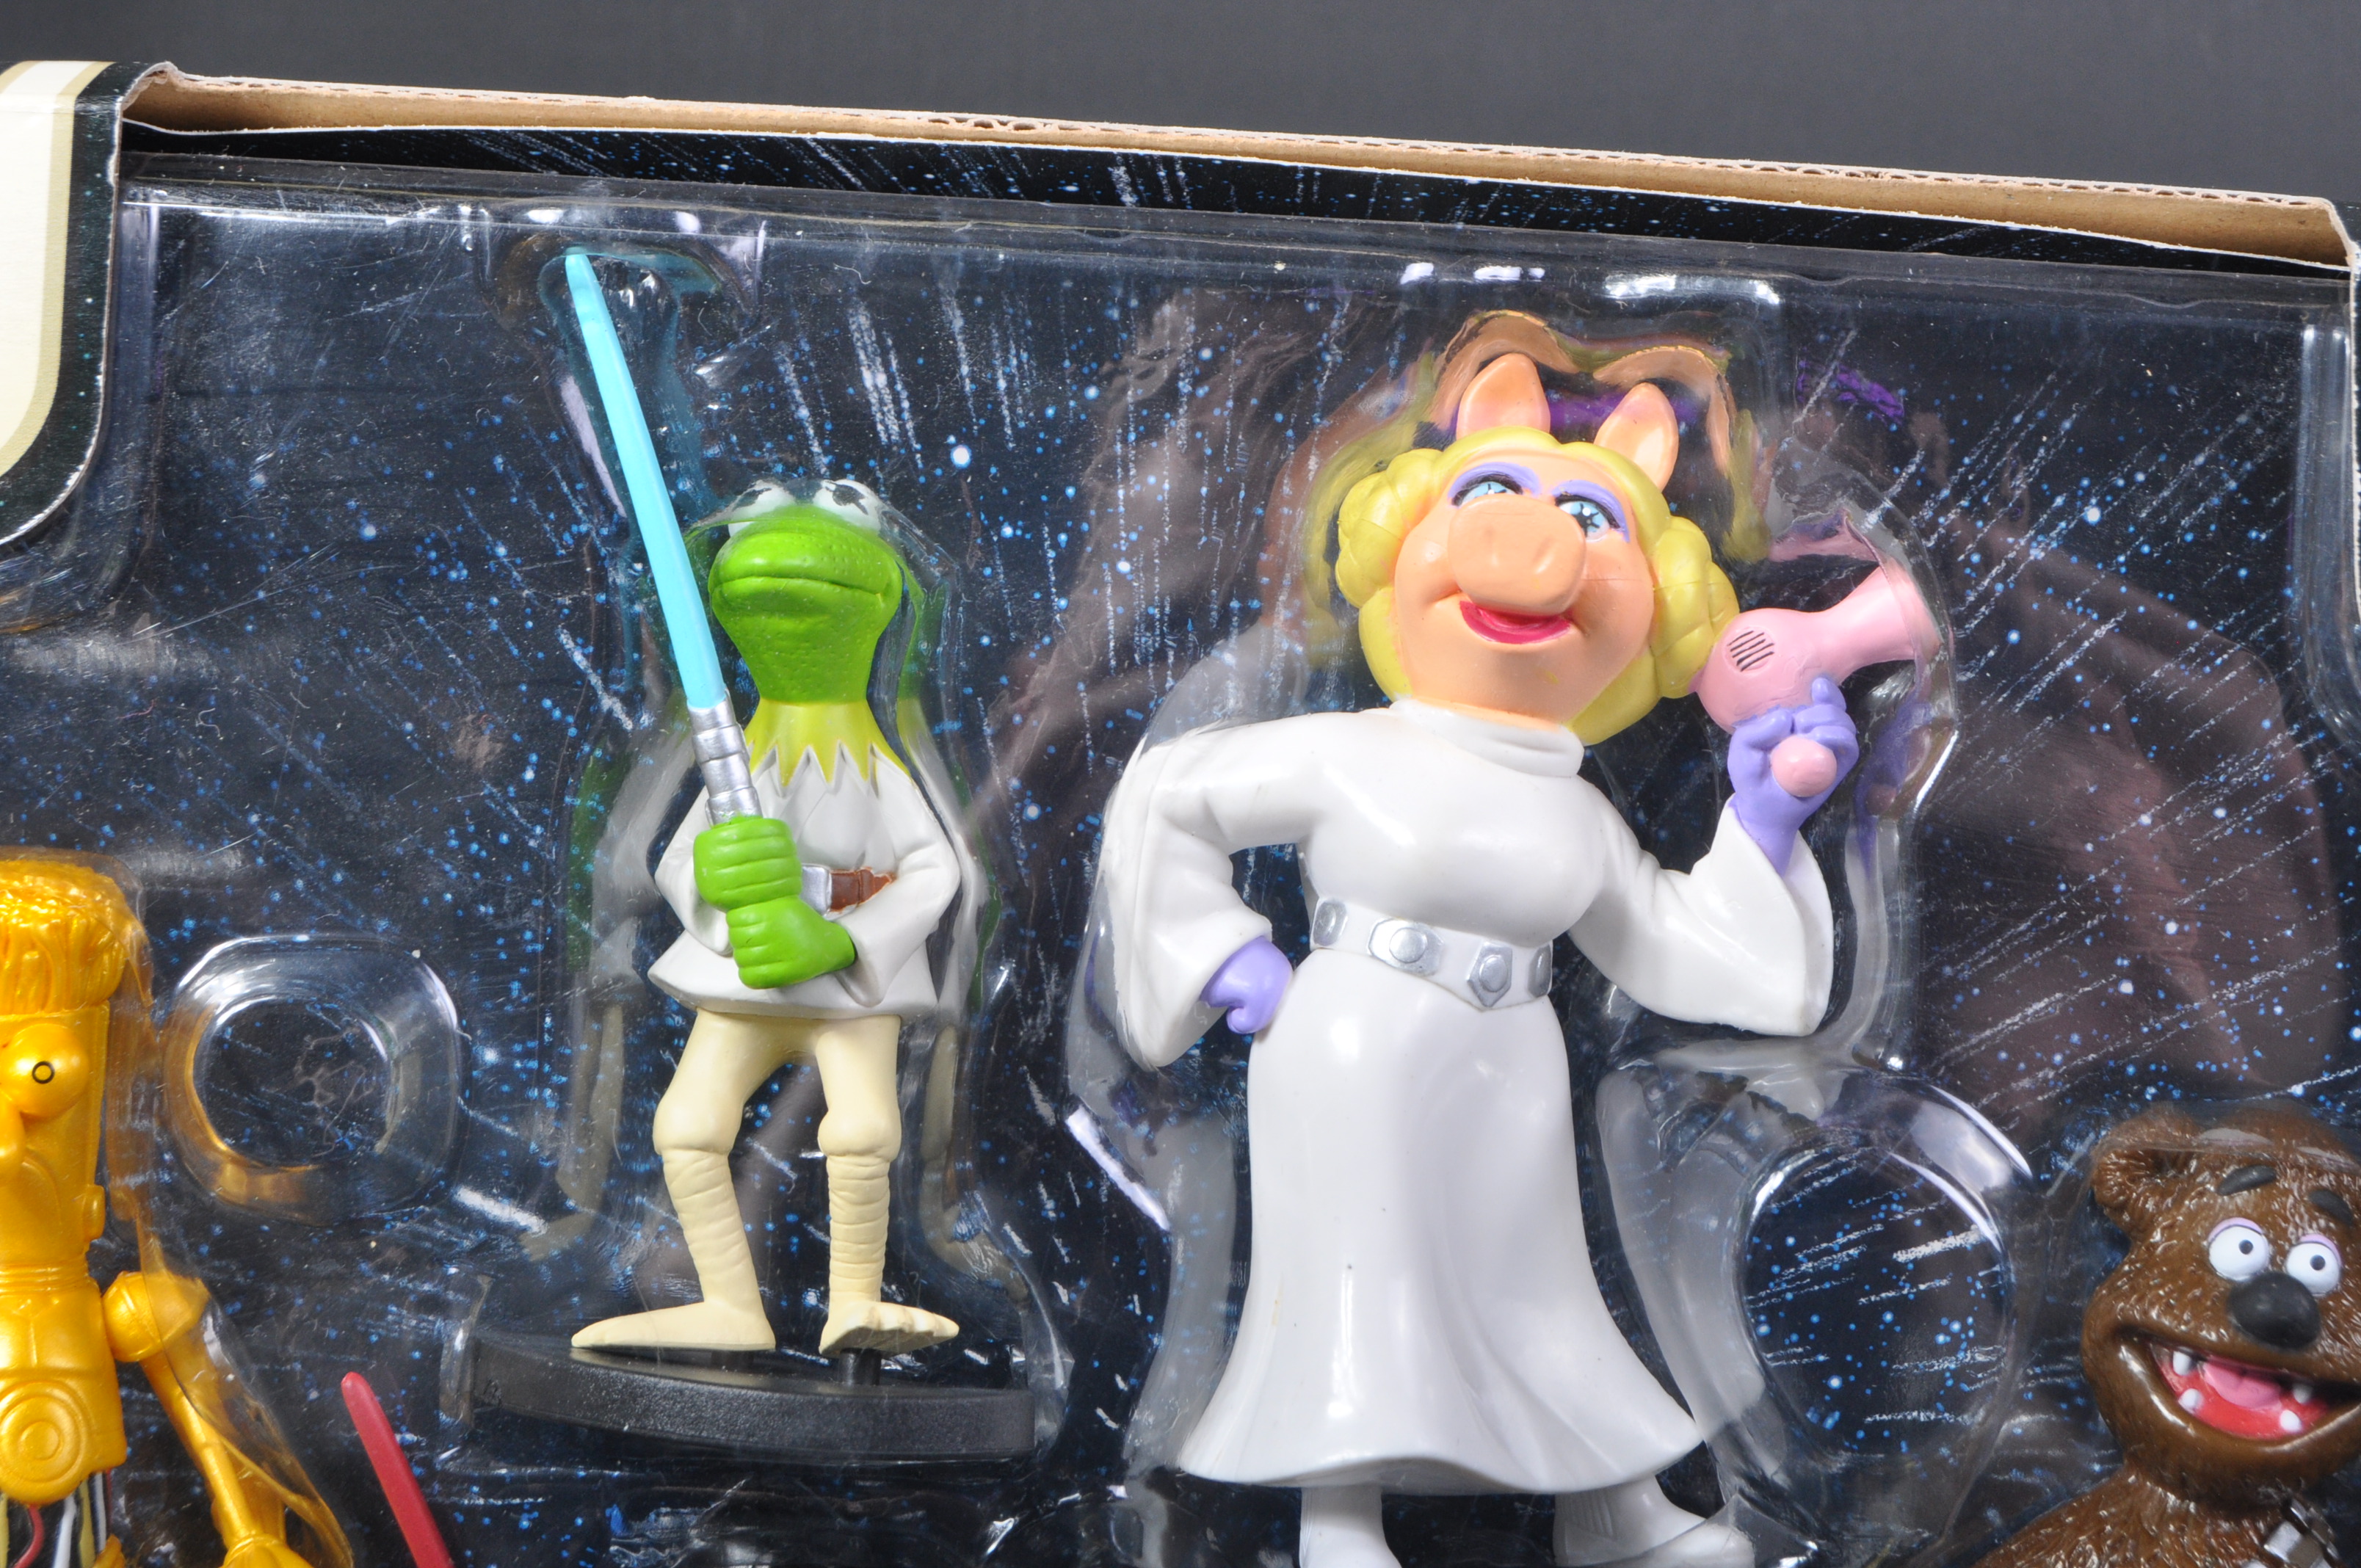 ESTATE OF JEREMY BULLOCH - STAR WARS - MUPPETS ACTION FIGURES - Image 2 of 5